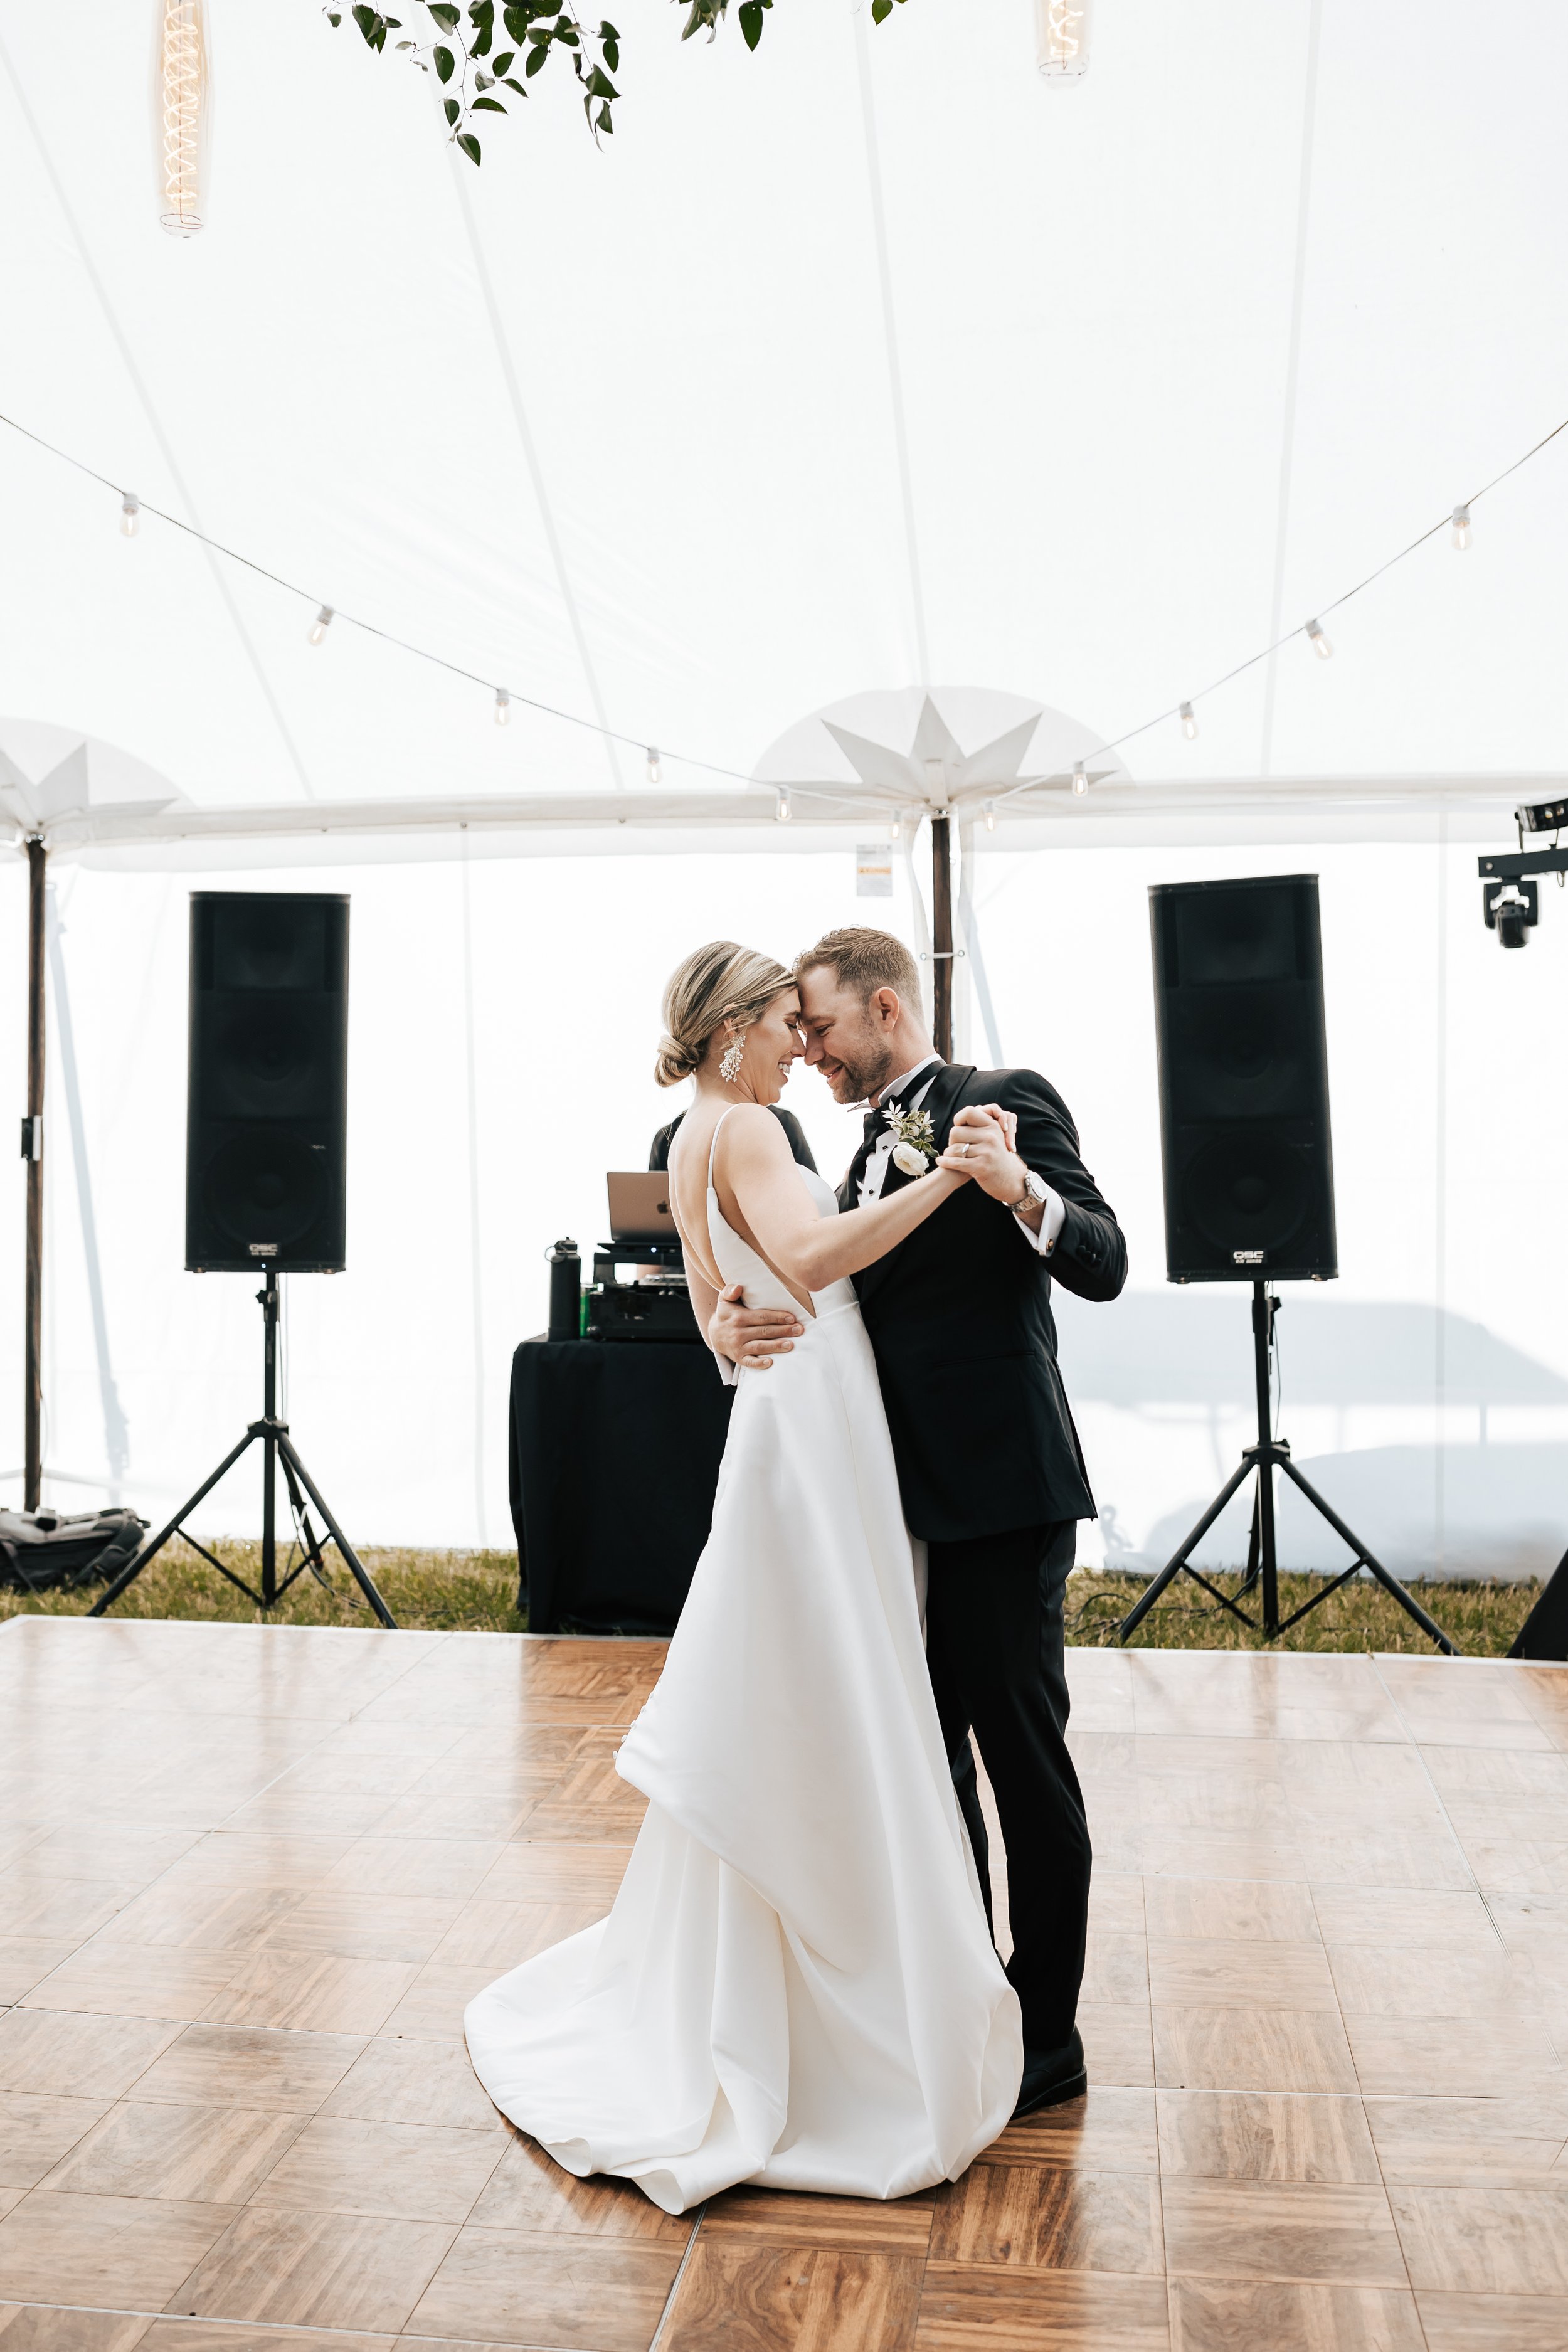  Bride and groom first dance. Bride and groom smile at wedding in the forest in Whitefish, Montana. Wedding inspo. Bride is wearing gorgeous large white earrings with a strappy wedding dress and veil and groom is wearing a black suit and bowtie. #mon